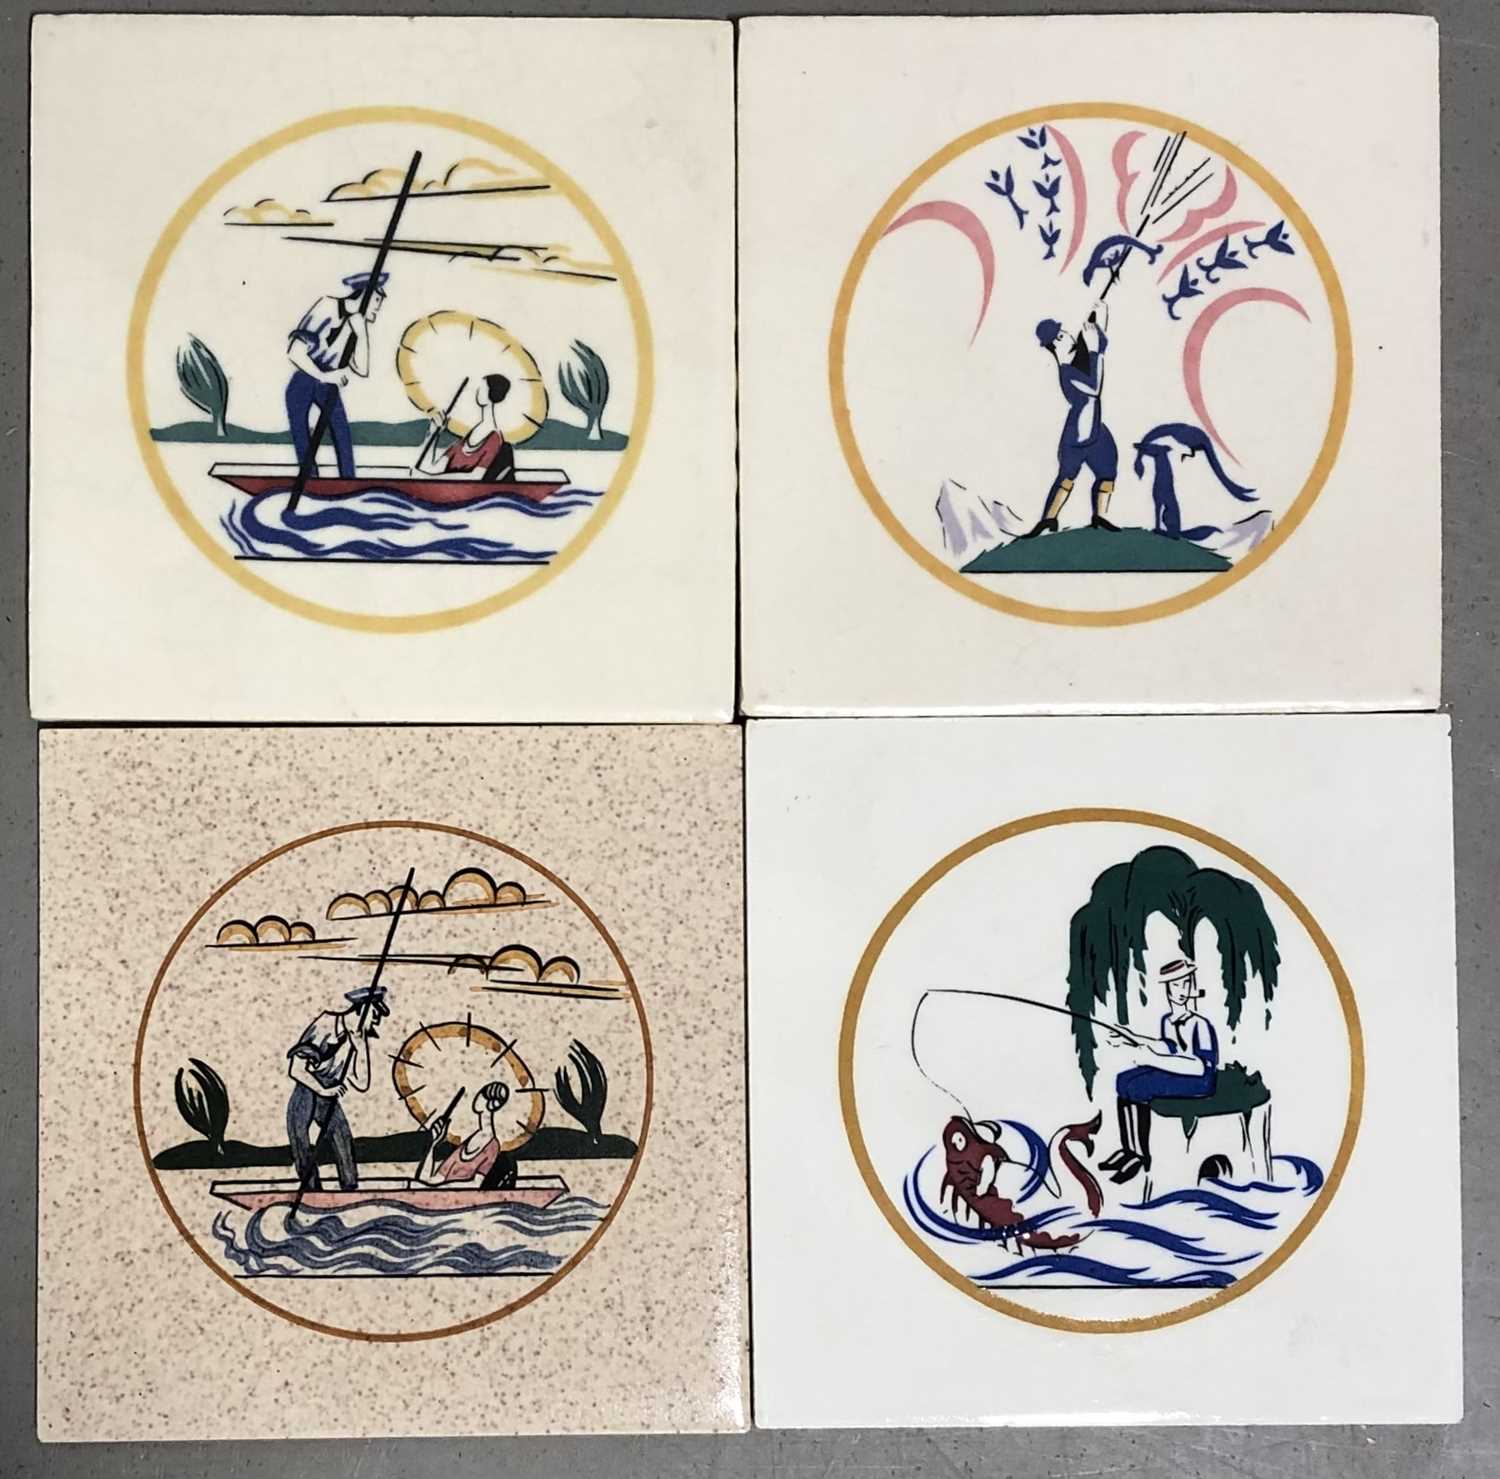 Lot 199 - Four hand-painted decorative tiles from the 'Sporting' series by Edward Bawden for Carters.